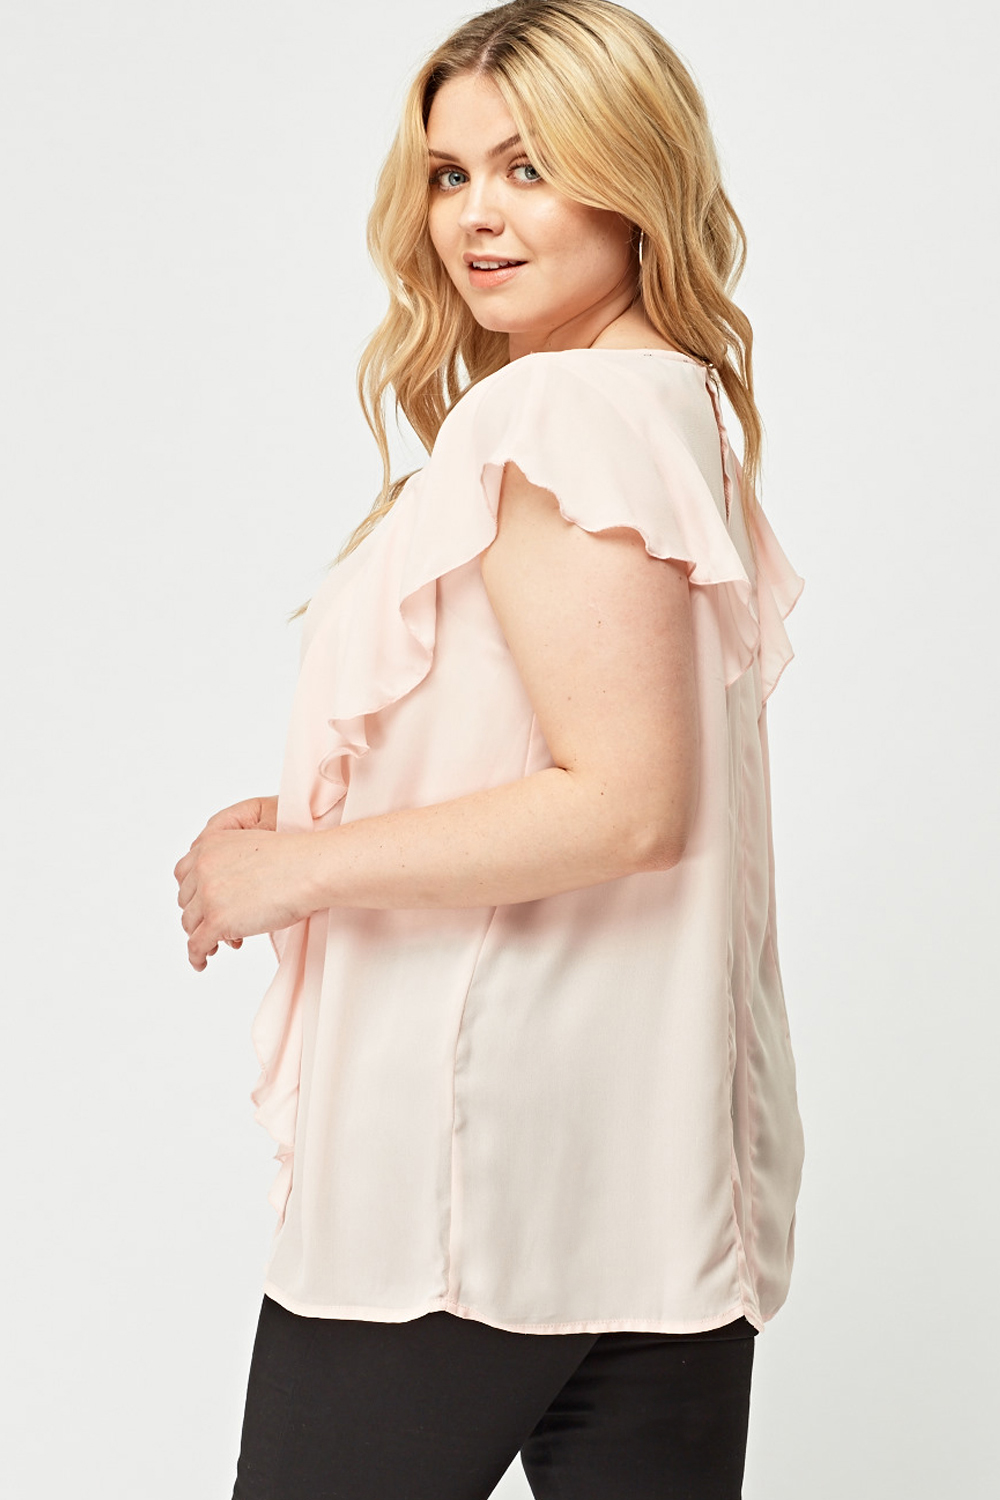 Frilly Pink Blouse Top - Just $7